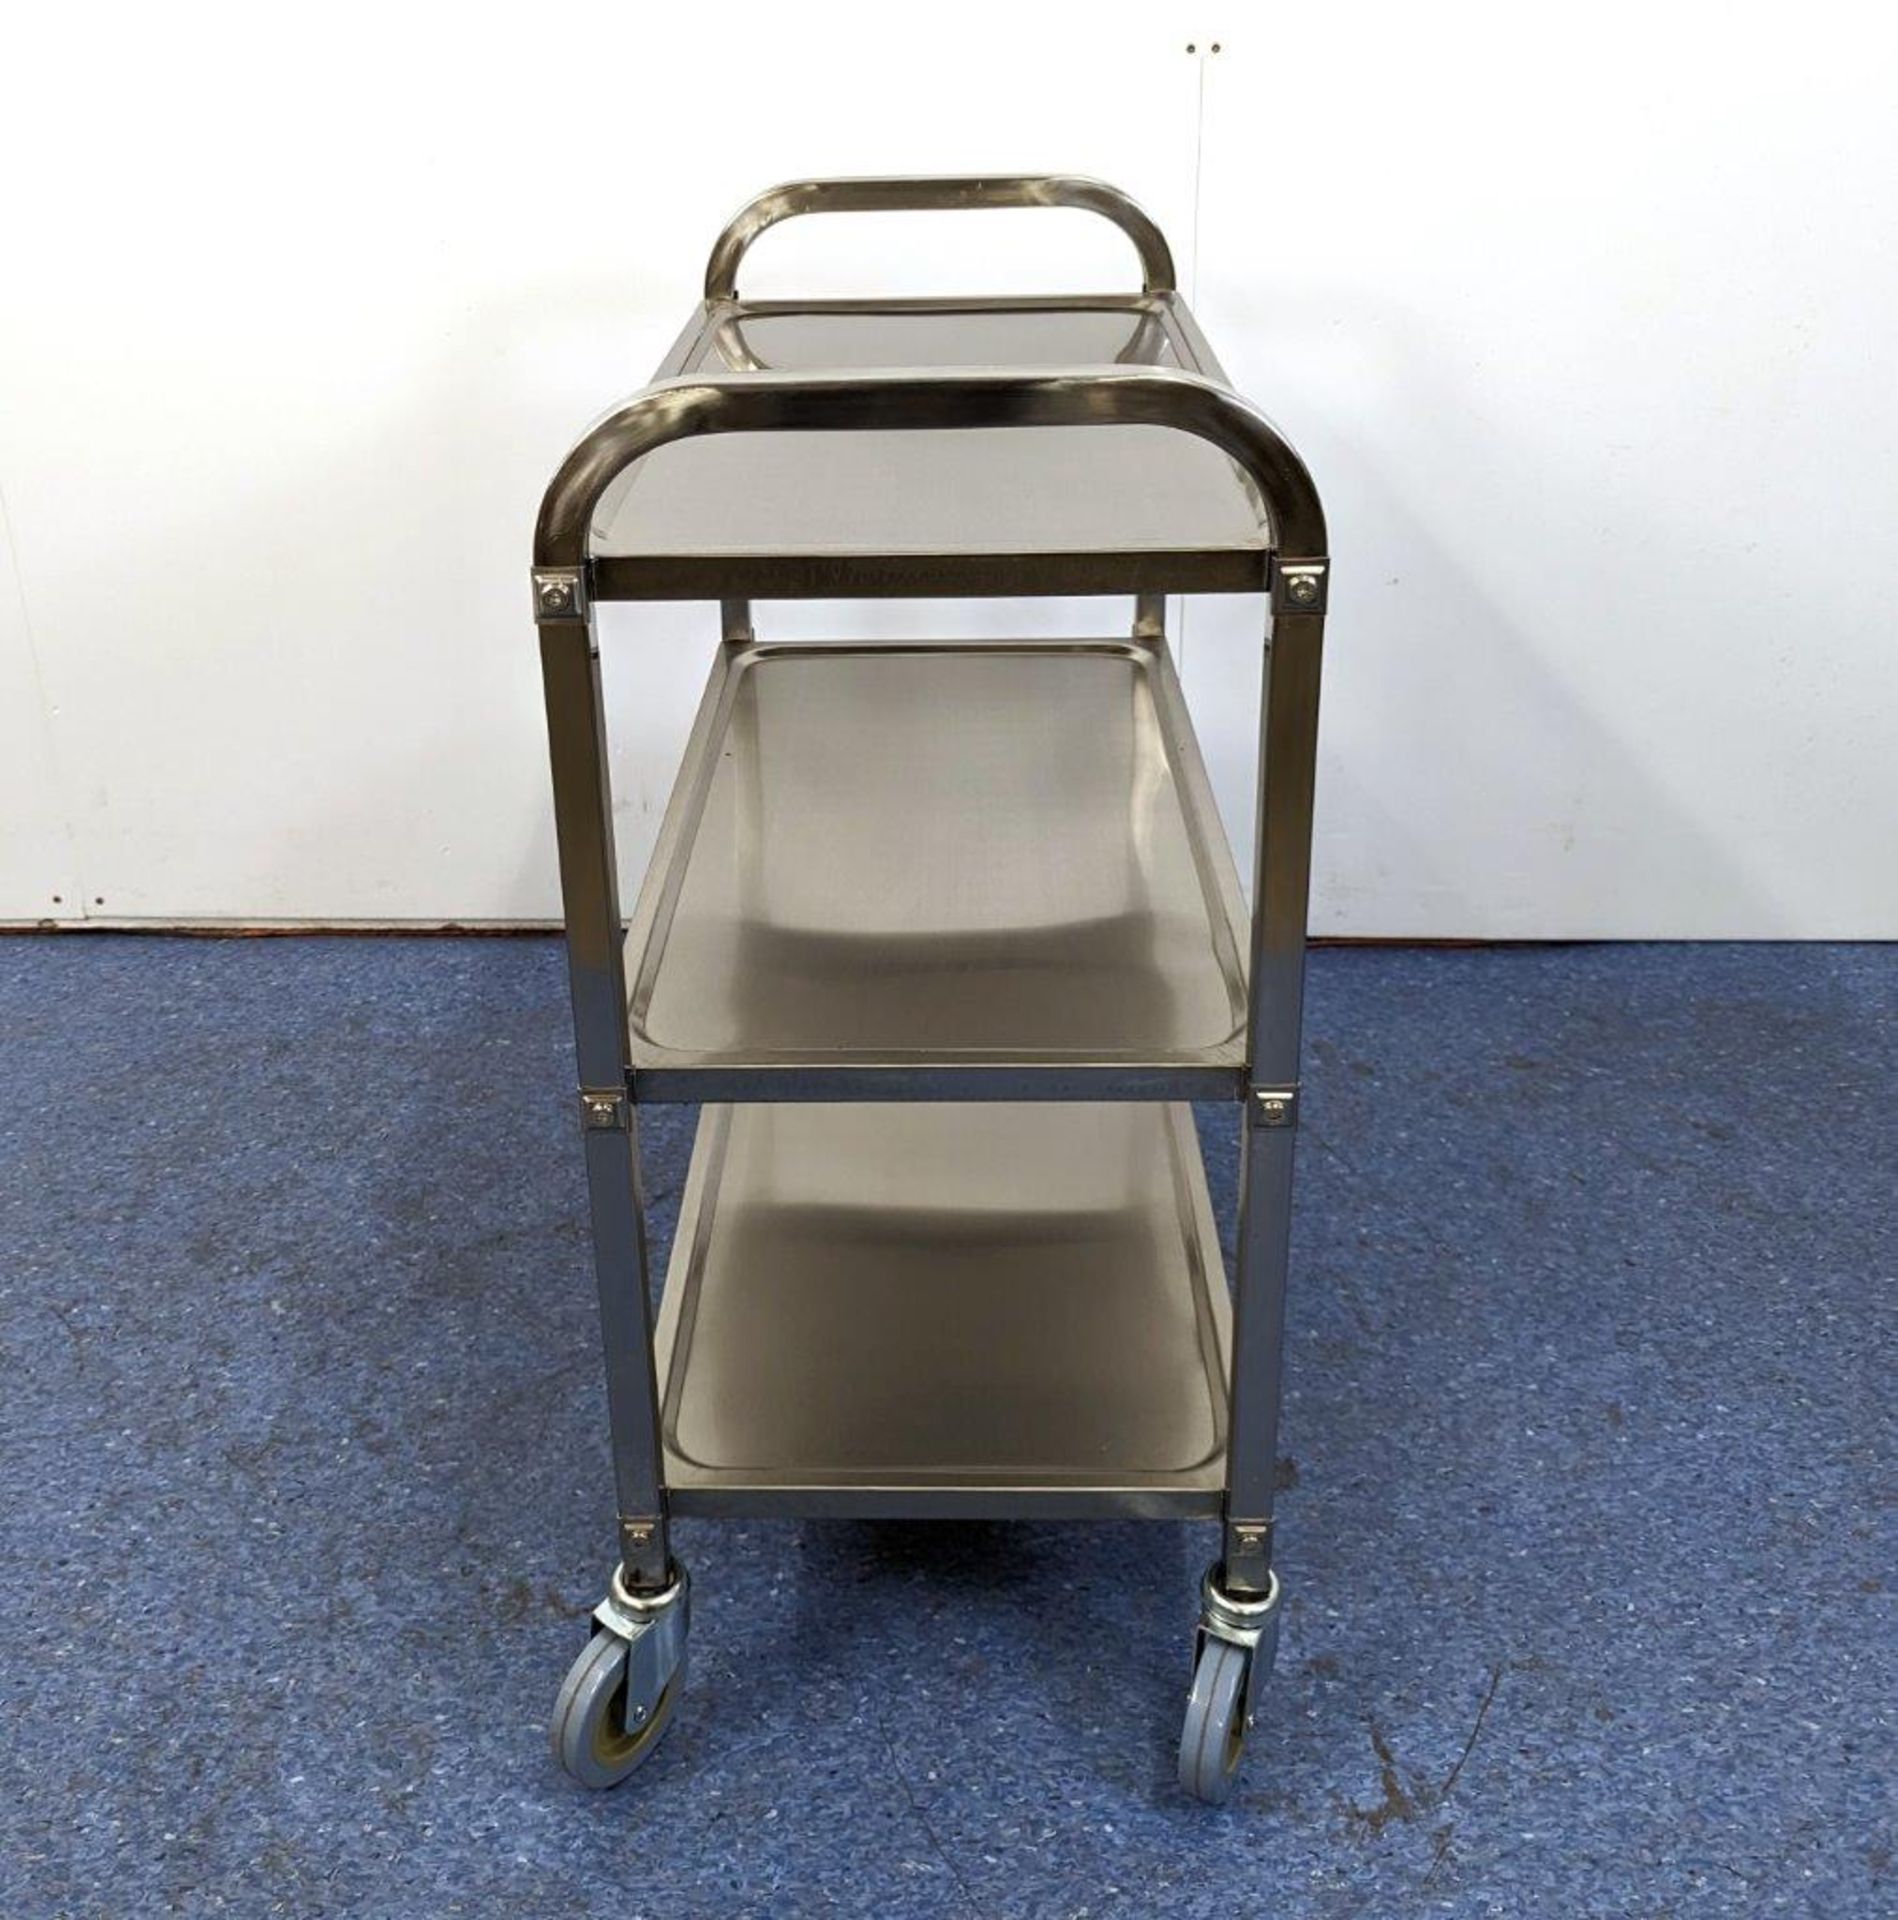 STAINLESS STEEL BUSSING CART WITH 27.25" X 15.75" TRAY SIZE, OMCAN 24418 - Image 3 of 5